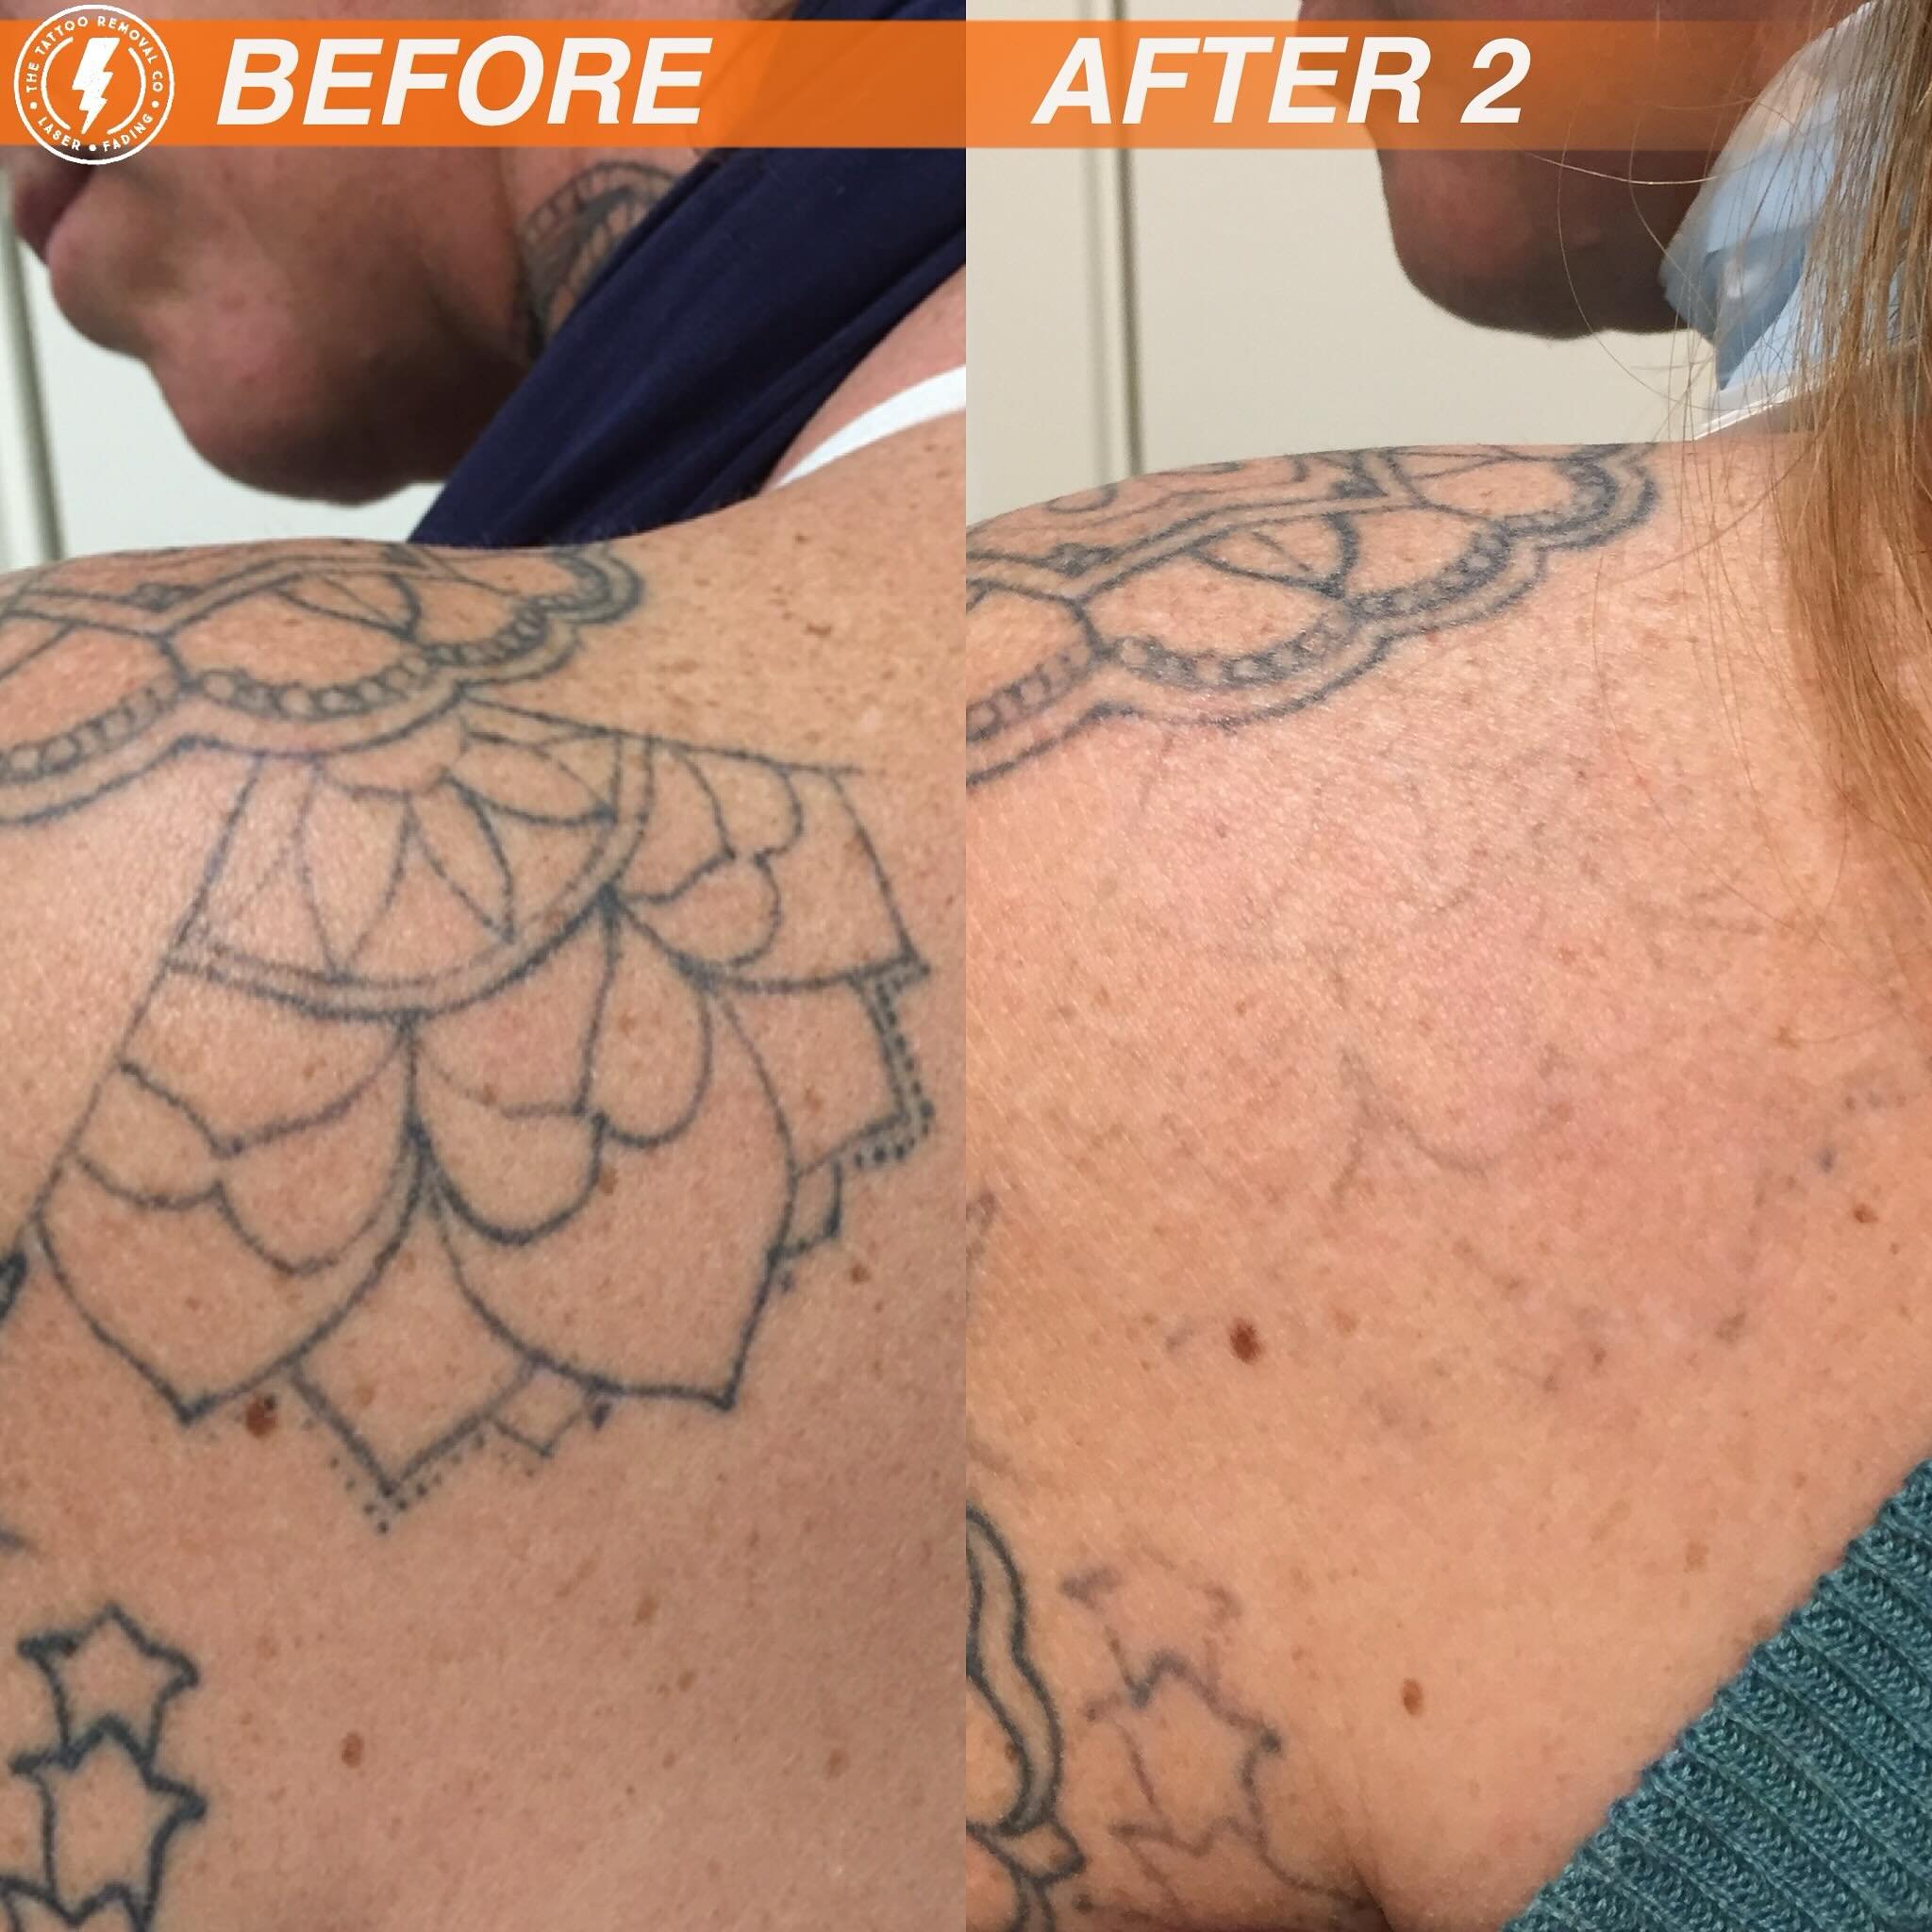 BEFORE/AFTER 2 TREATMENTS💥

Tough shoulders make easy work

⚡️Fabulous result so far. These are the results you get with our experienced and knowledgeable Laser Technician @philly_ttrc_pagdin ⚡️

Consultations are FREE please don&rsquo;t hesitate to